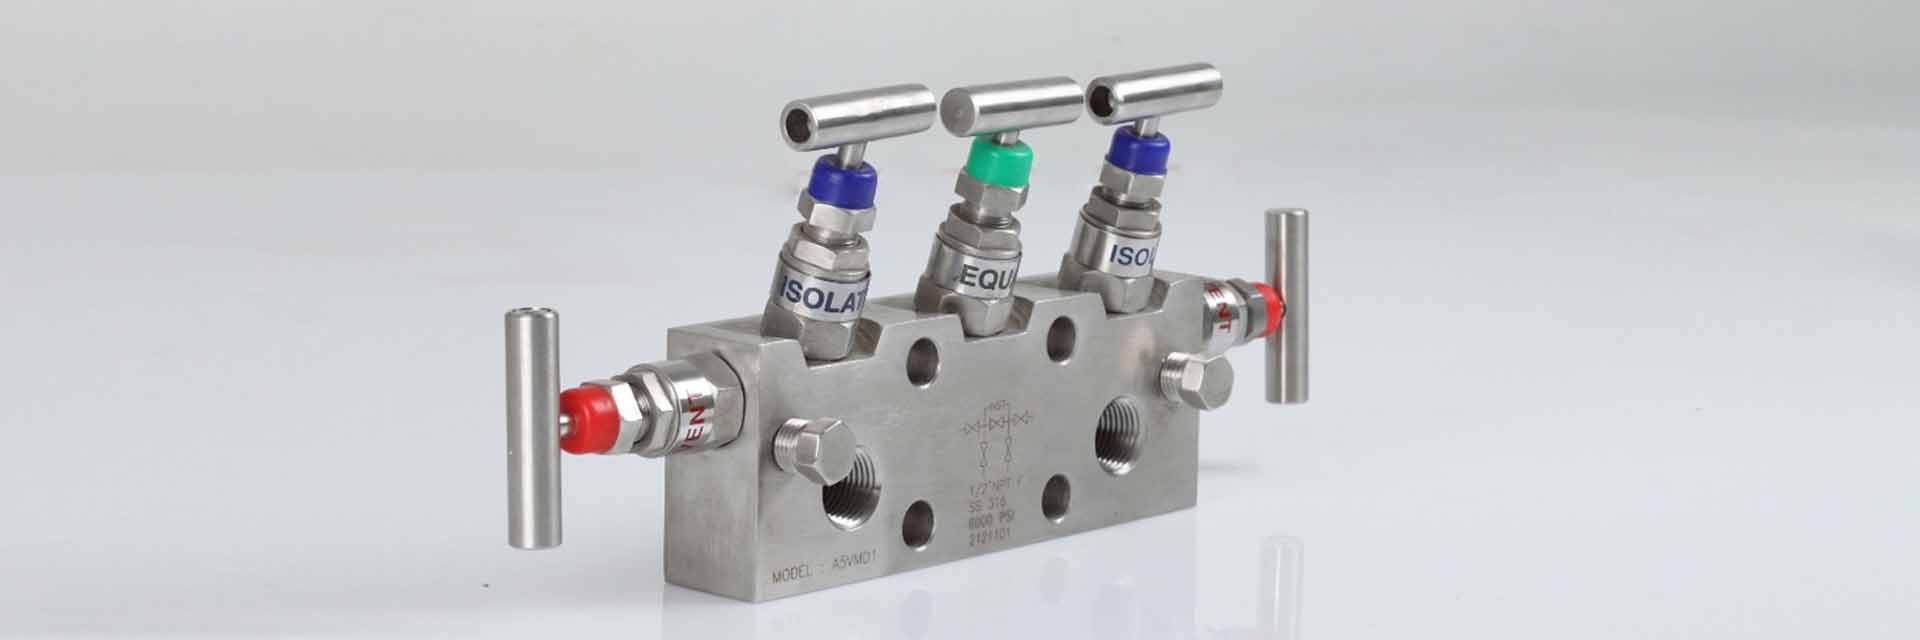 Stainless Steel 5 Way Manifold Valves Supplier